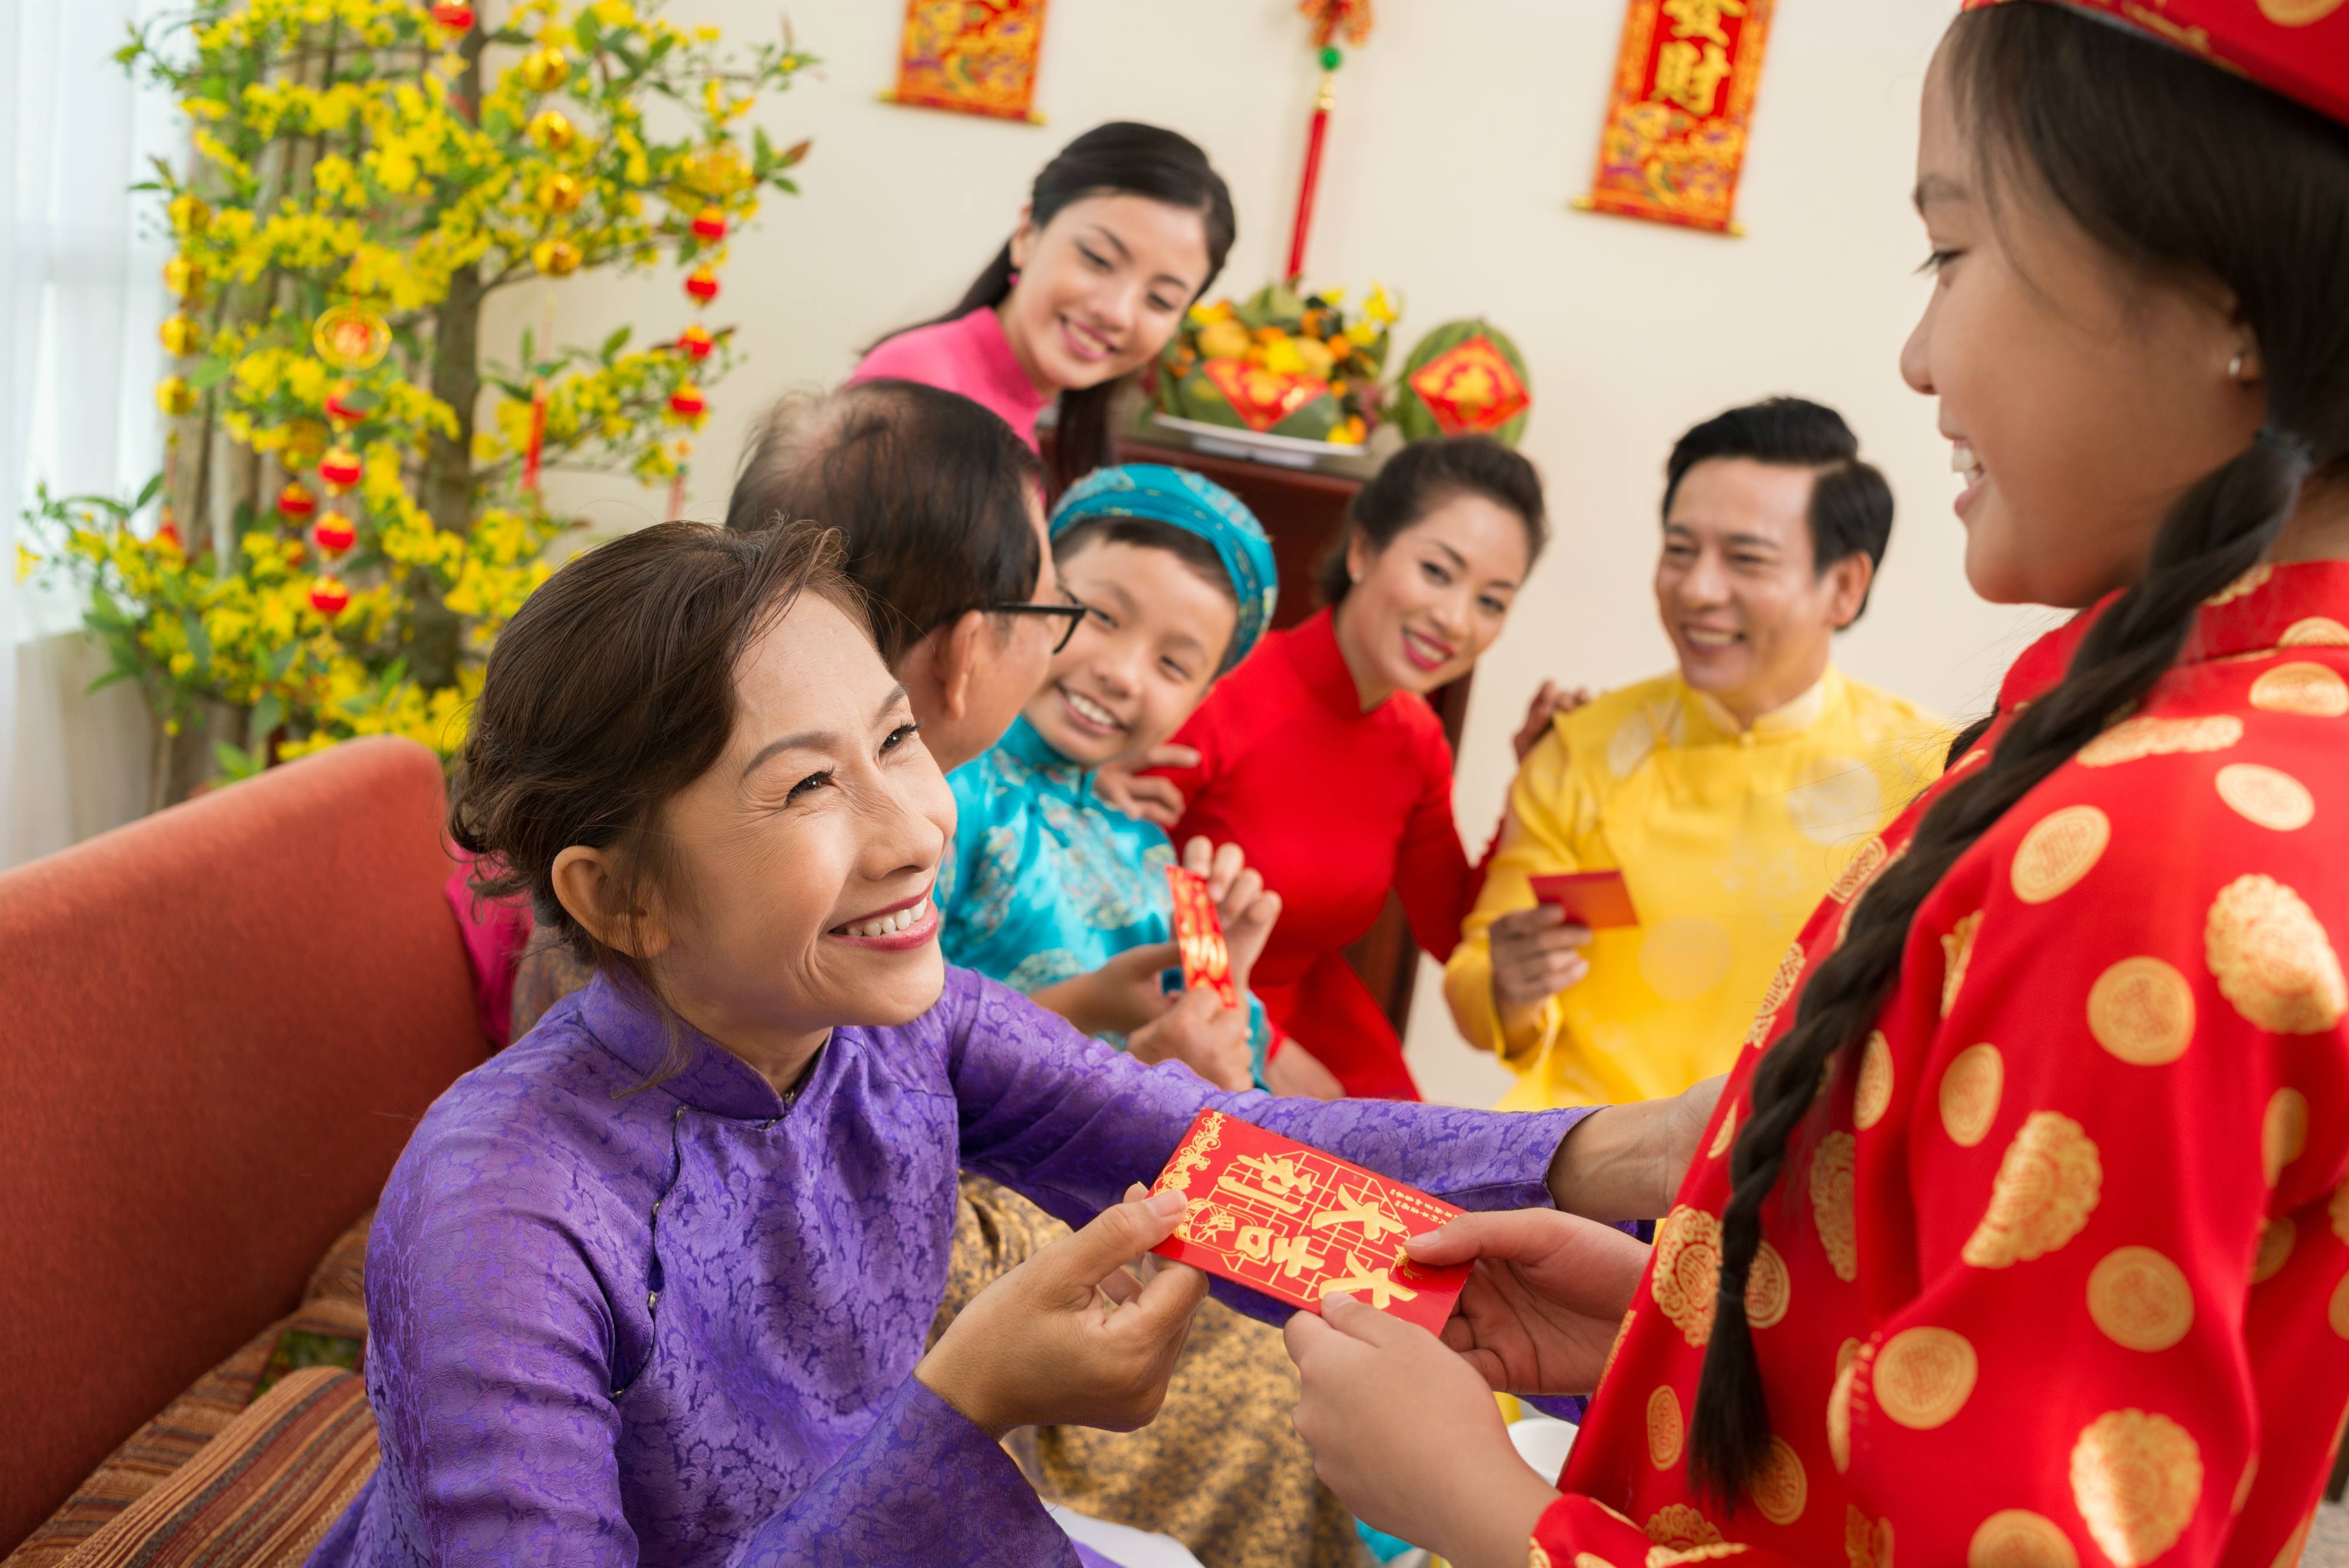 The 6th of Tet is the last day of Tet holiday for most Vietnamese citizens